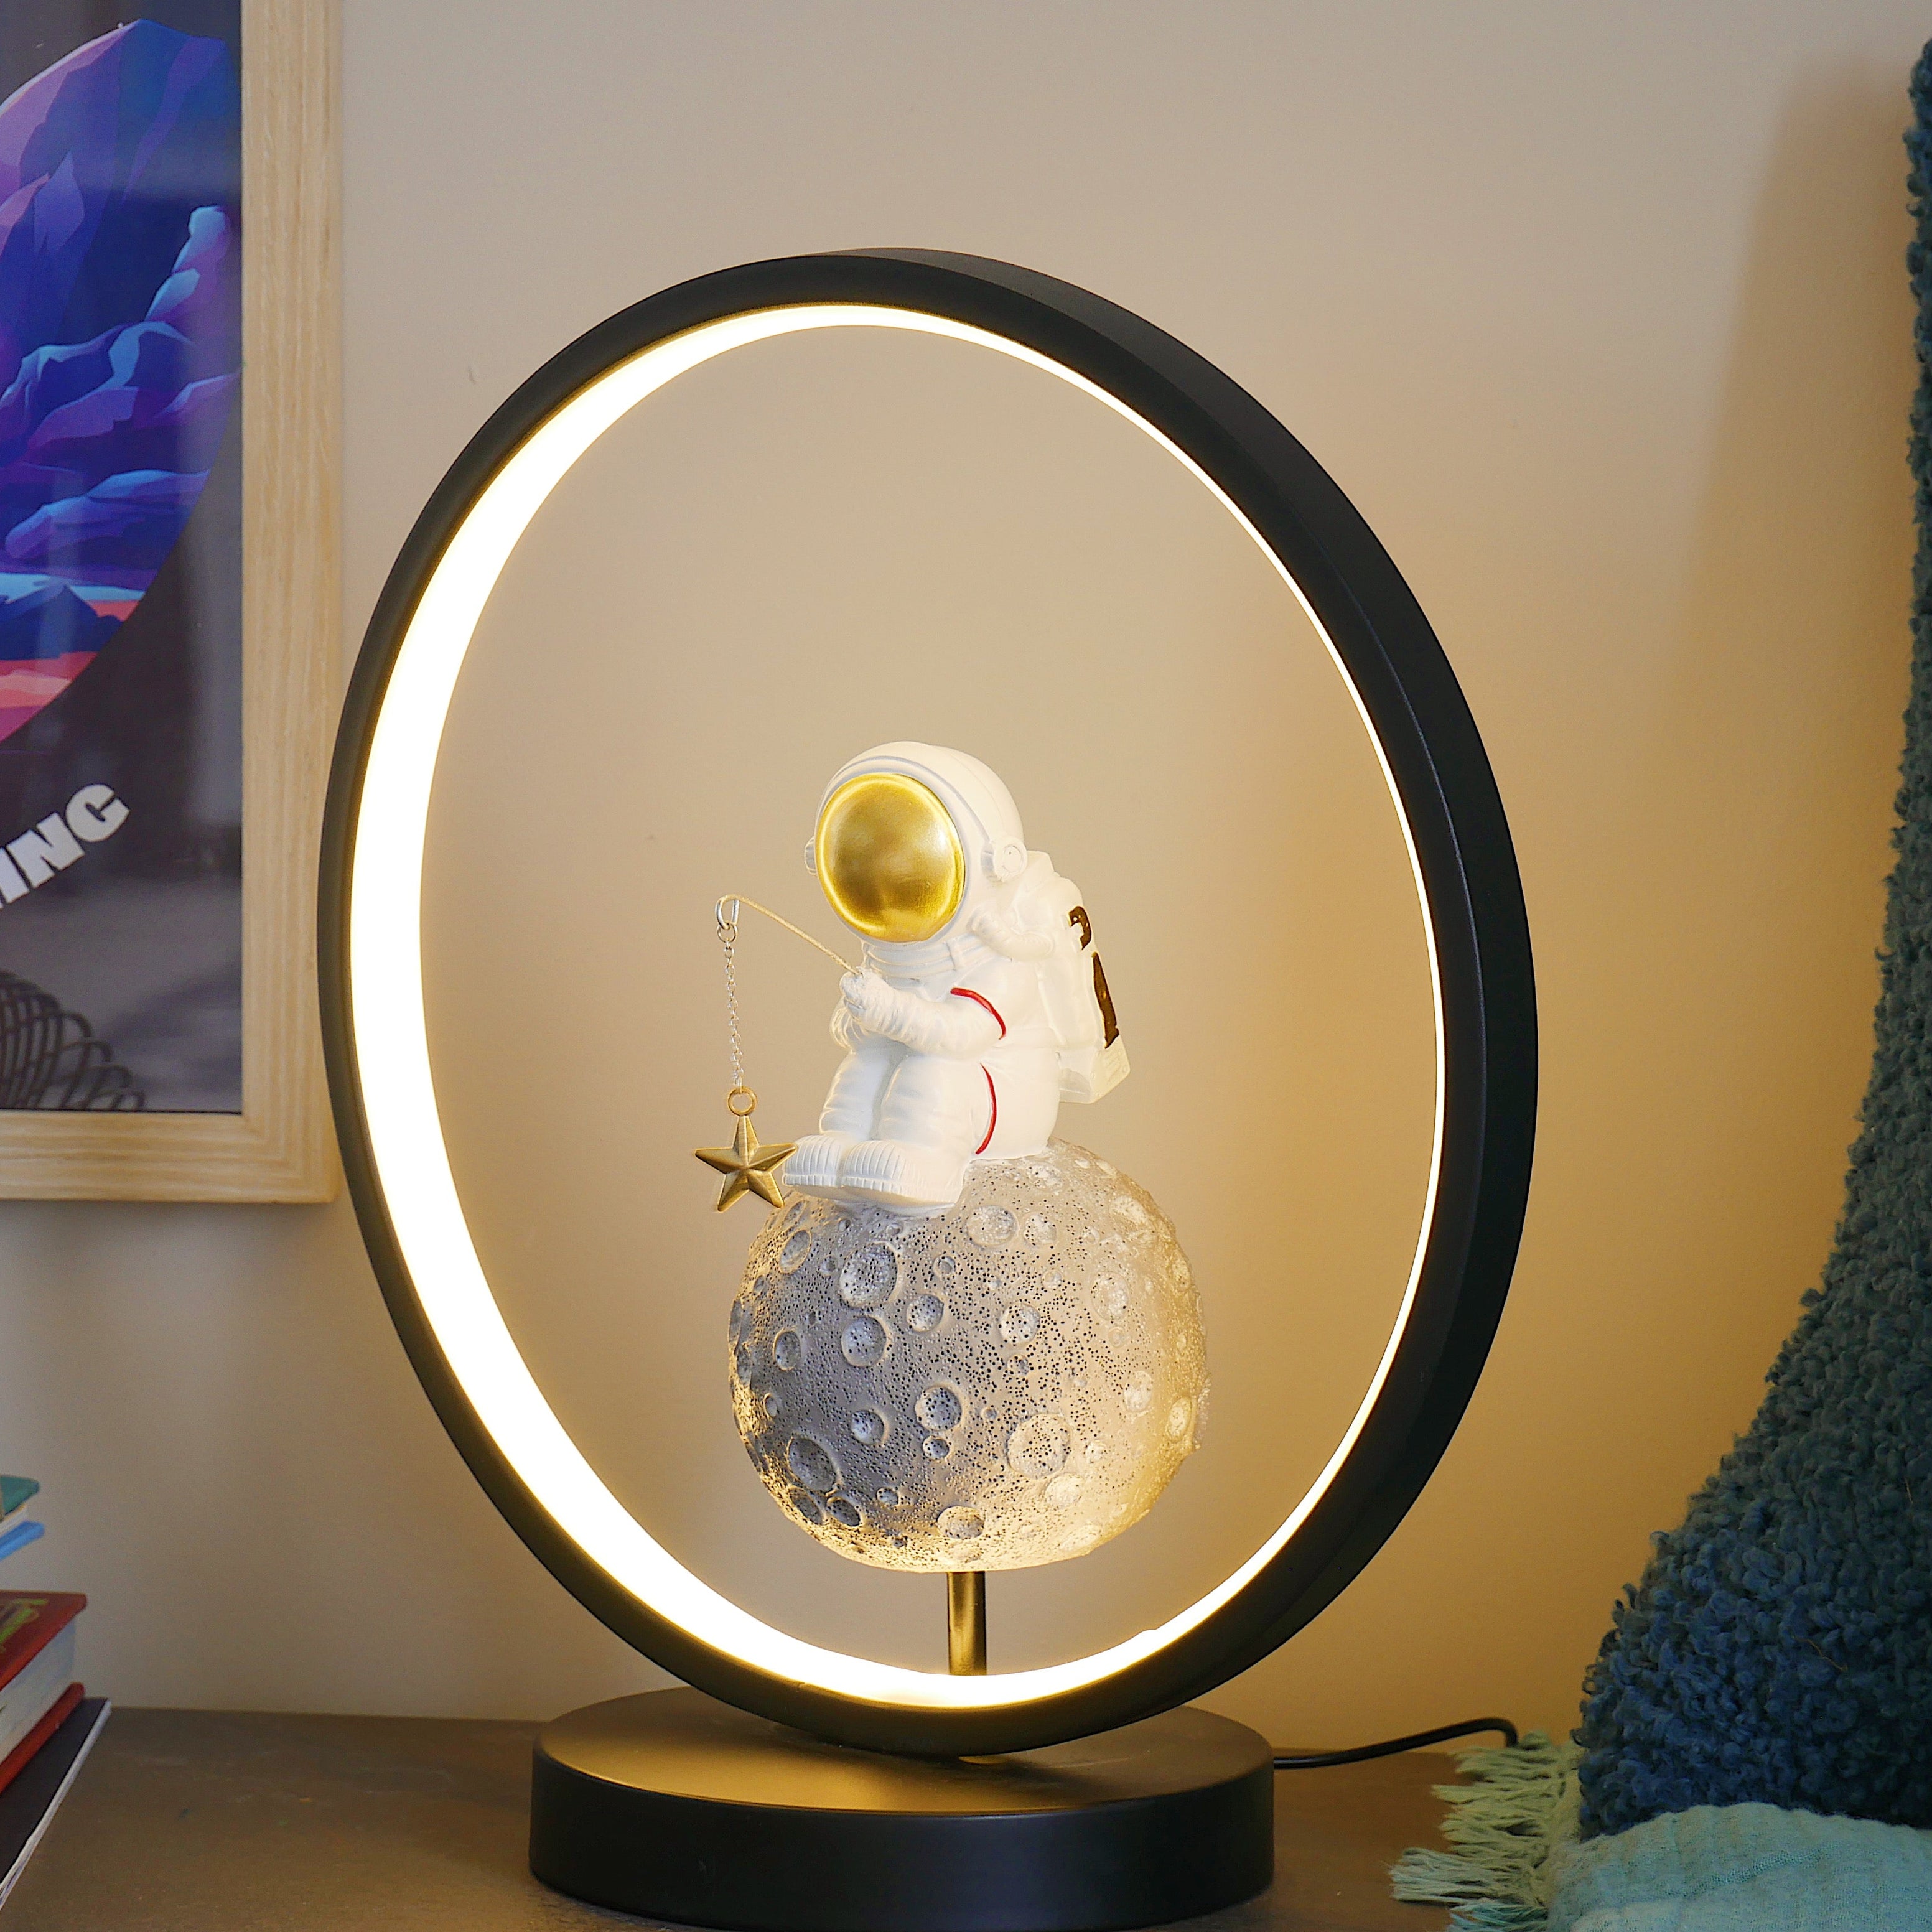 PACK OF 2 - Astro Catch Astronaut figurine LED Ring Bedside Lights